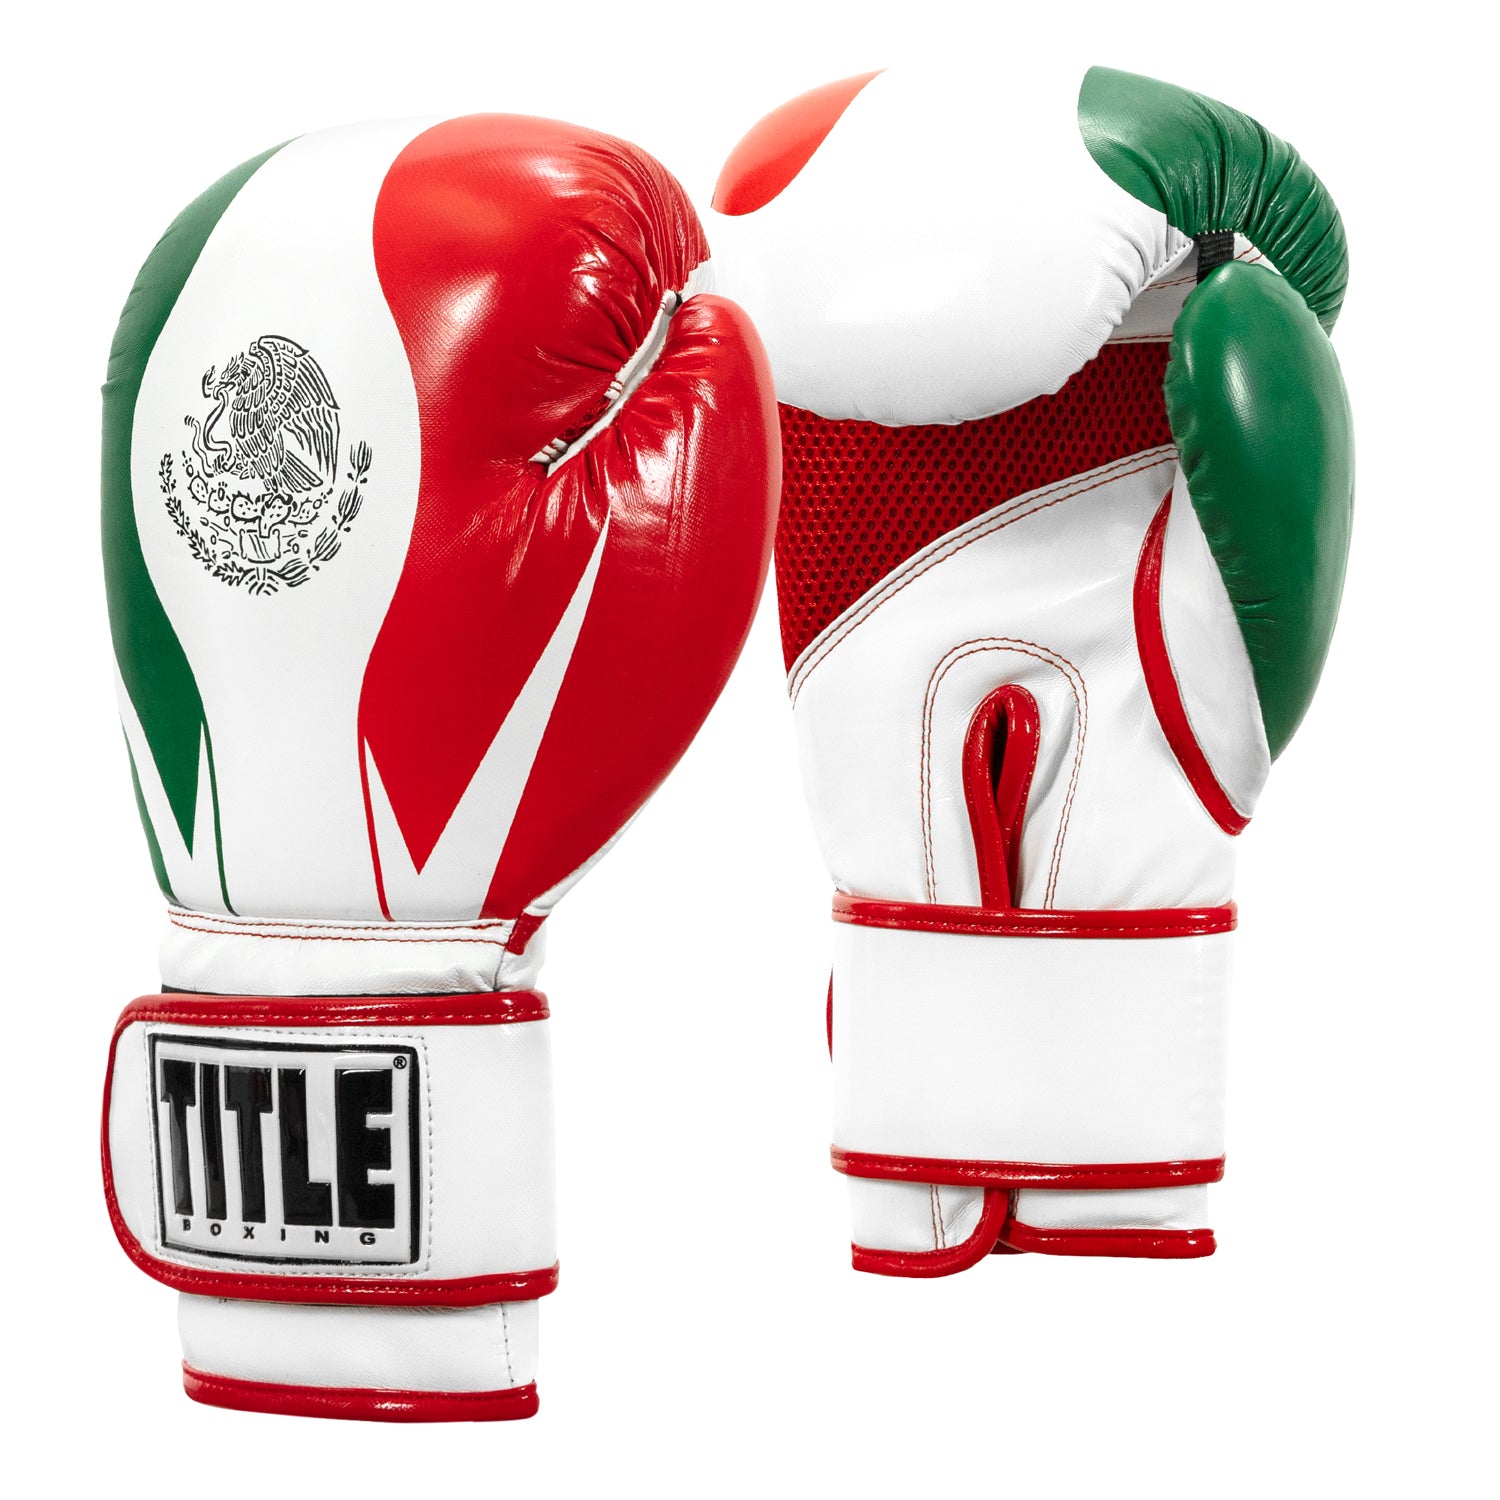 TITLE Infused Foam El Combate Mexico Training Gloves